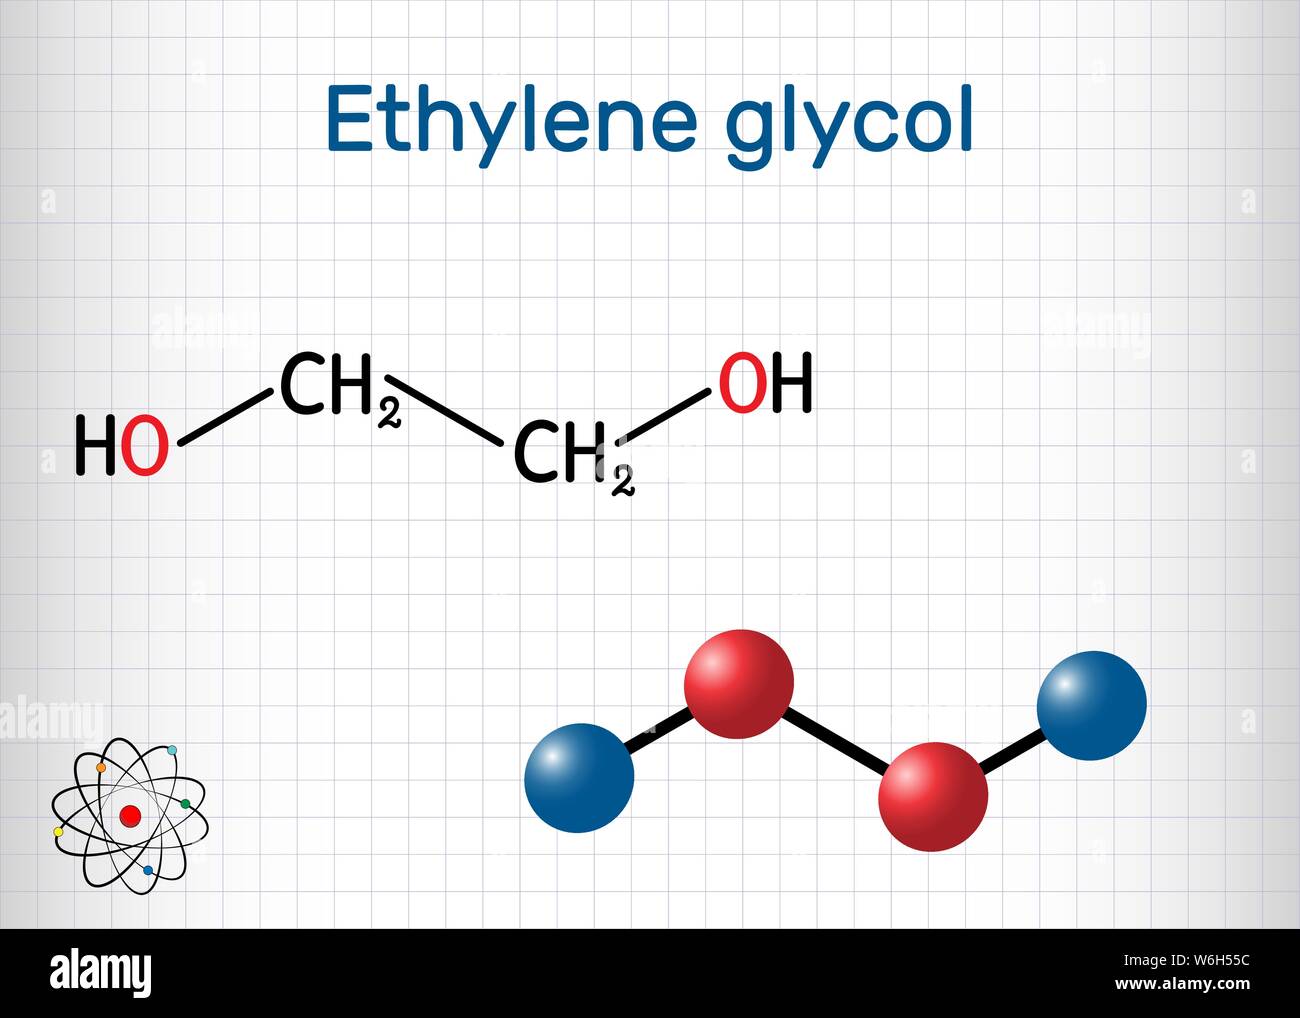 Ethylene glycol, diol molecule. It is used for manufacture of polyester fibers and for antifreeze formulations. Structural chemical formula. Sheet of Stock Vector